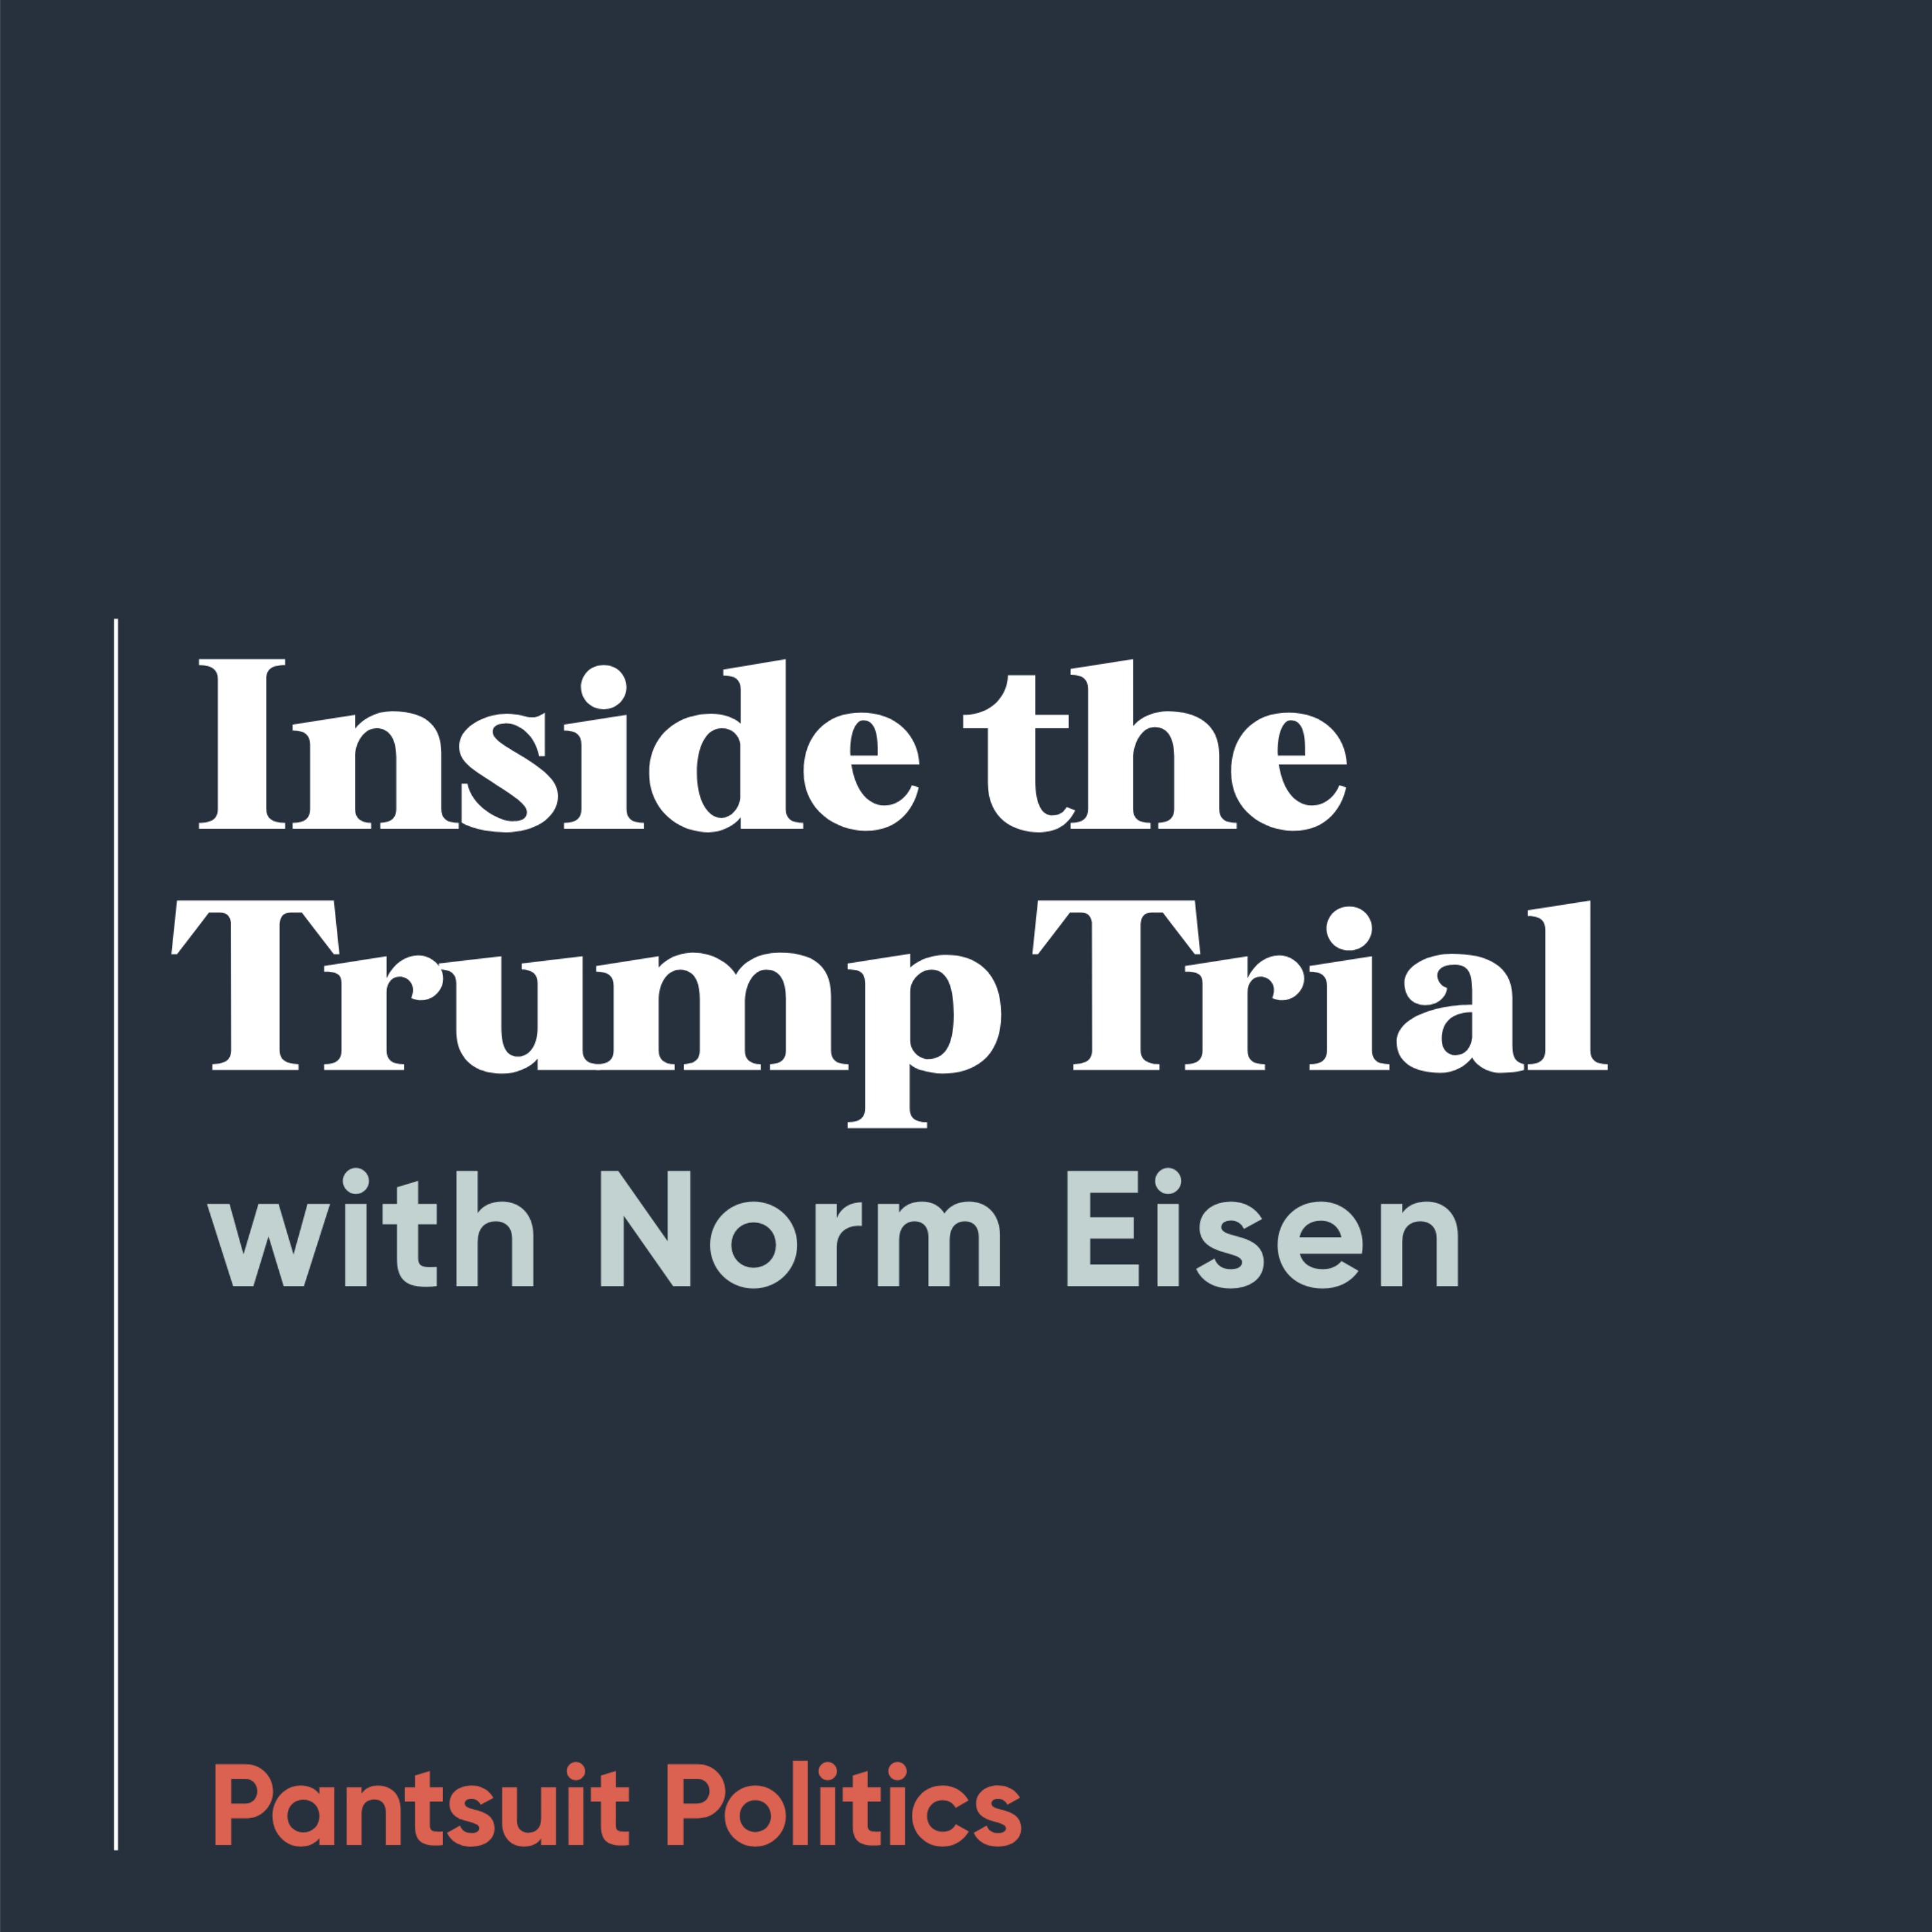 Inside the Trump Trial with Norm Eisen